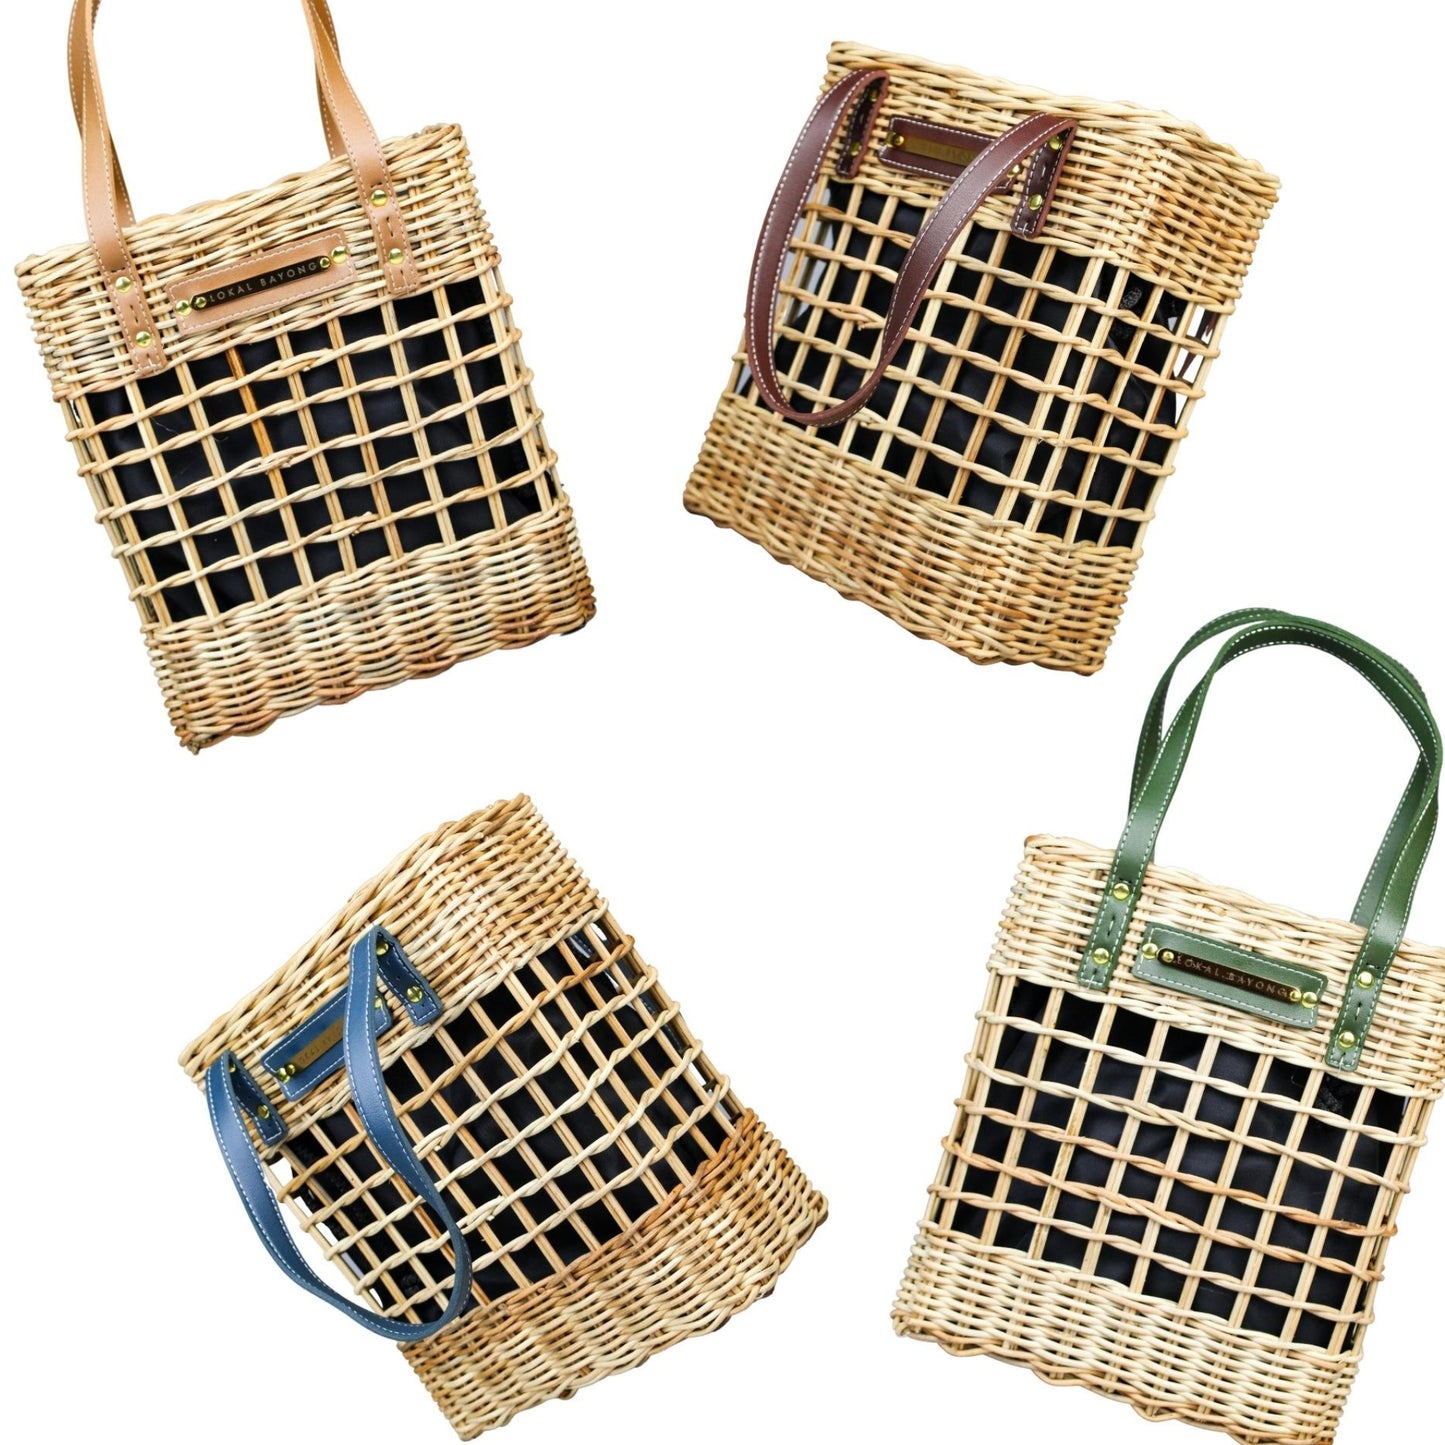 Rattan Bags in the Philippines